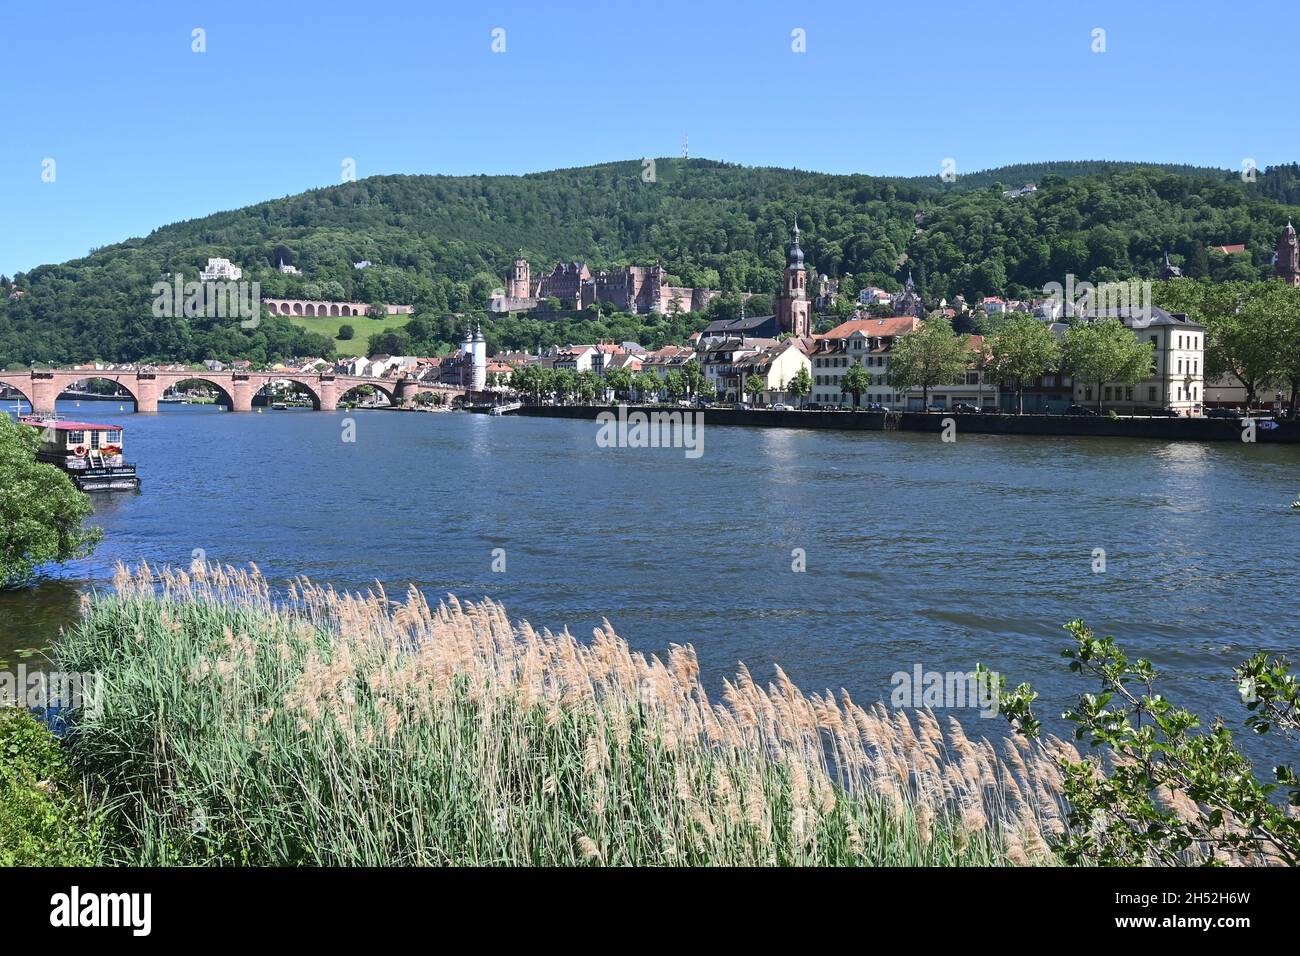 Neckar bank in Heidelberg with a view of the old town Stock Photo